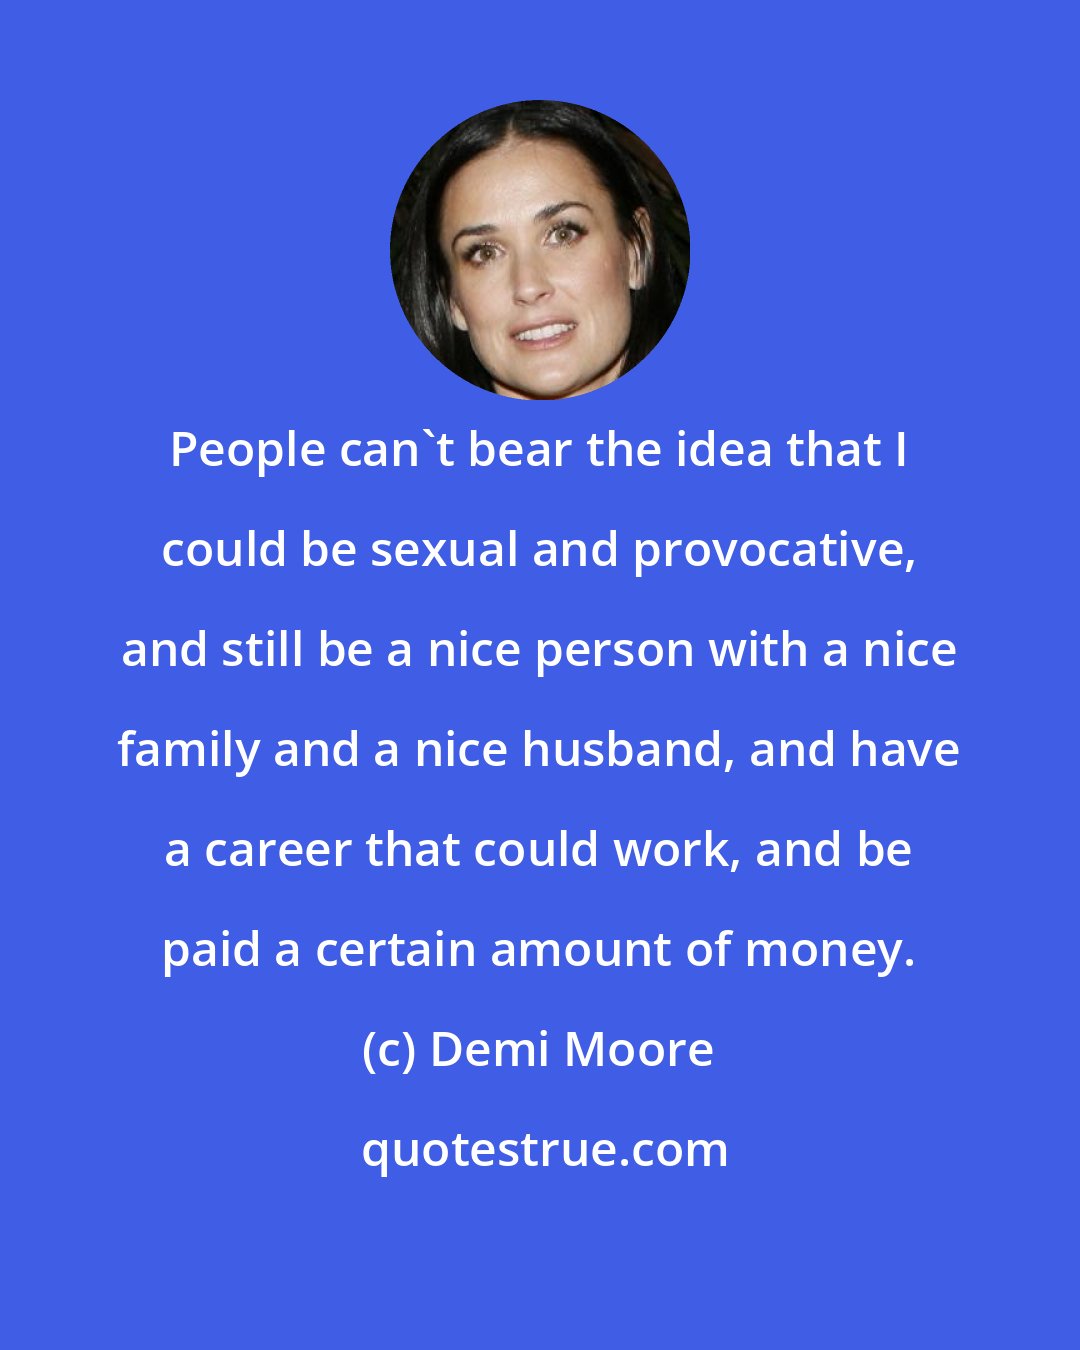 Demi Moore: People can't bear the idea that I could be sexual and provocative, and still be a nice person with a nice family and a nice husband, and have a career that could work, and be paid a certain amount of money.